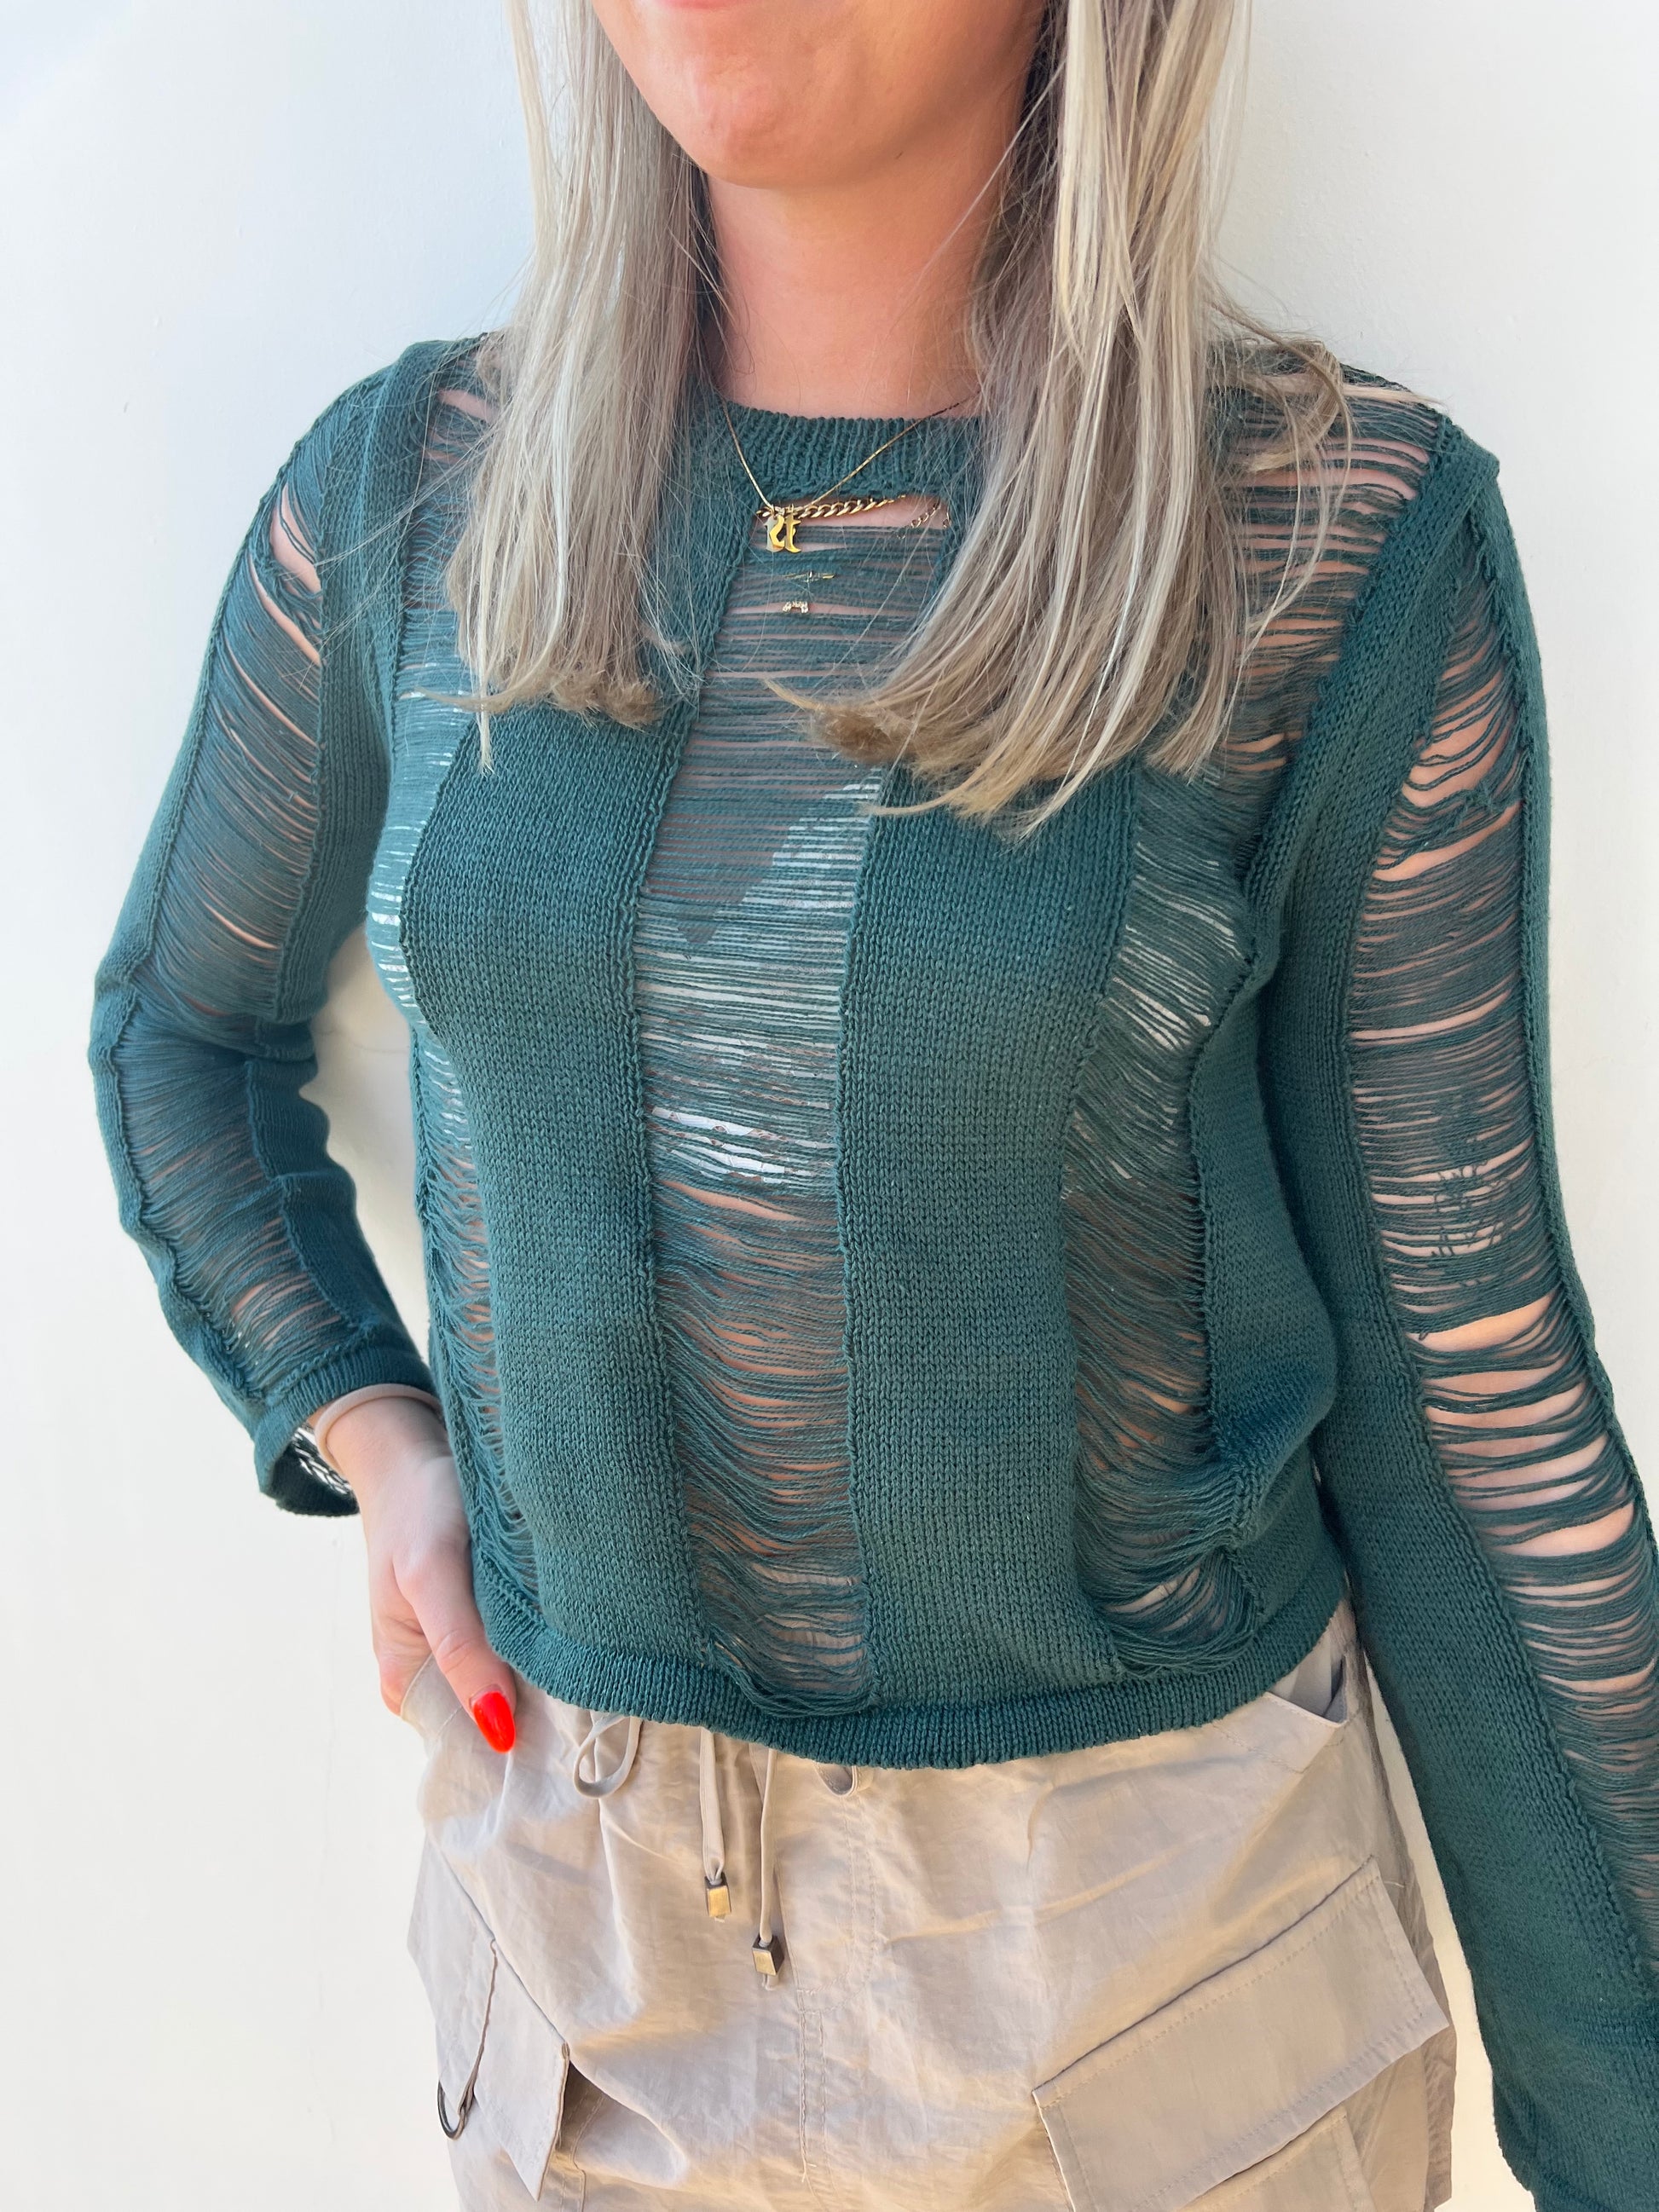 Distressed Sweater Top – The Vintage Thread